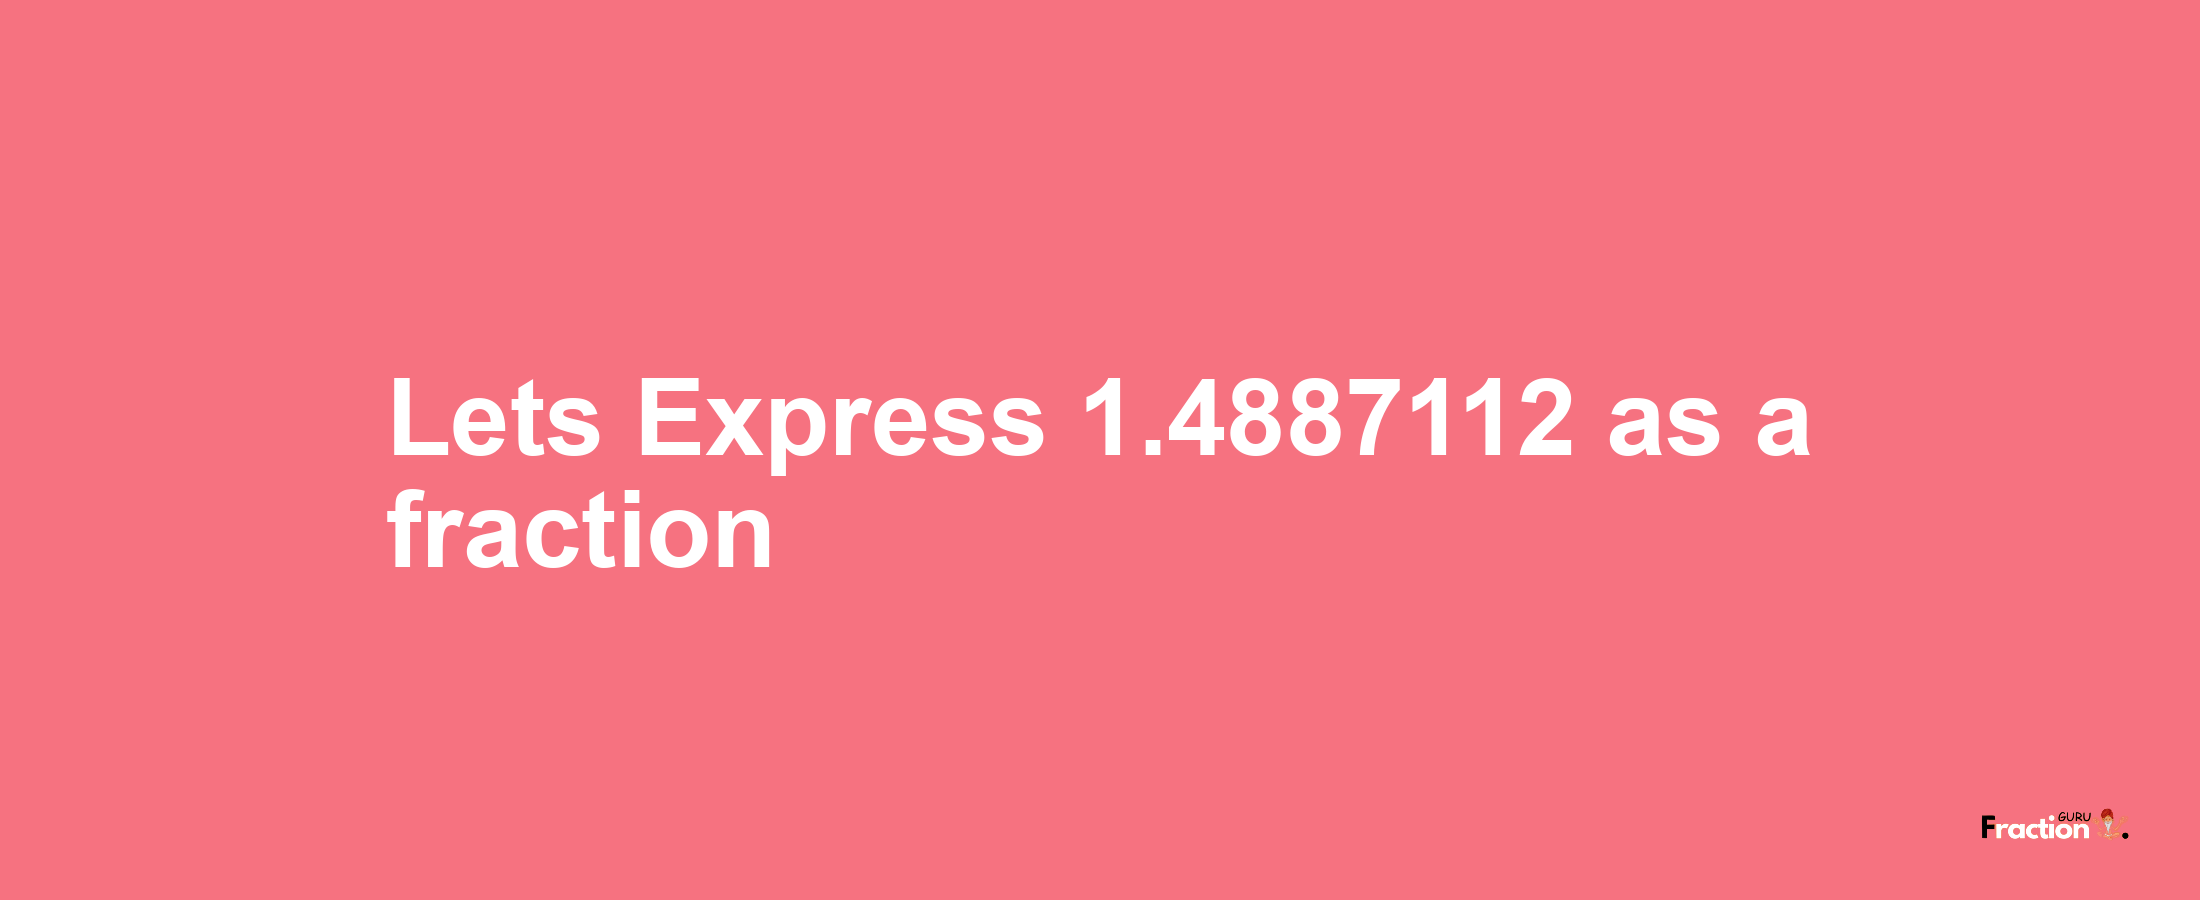 Lets Express 1.4887112 as afraction